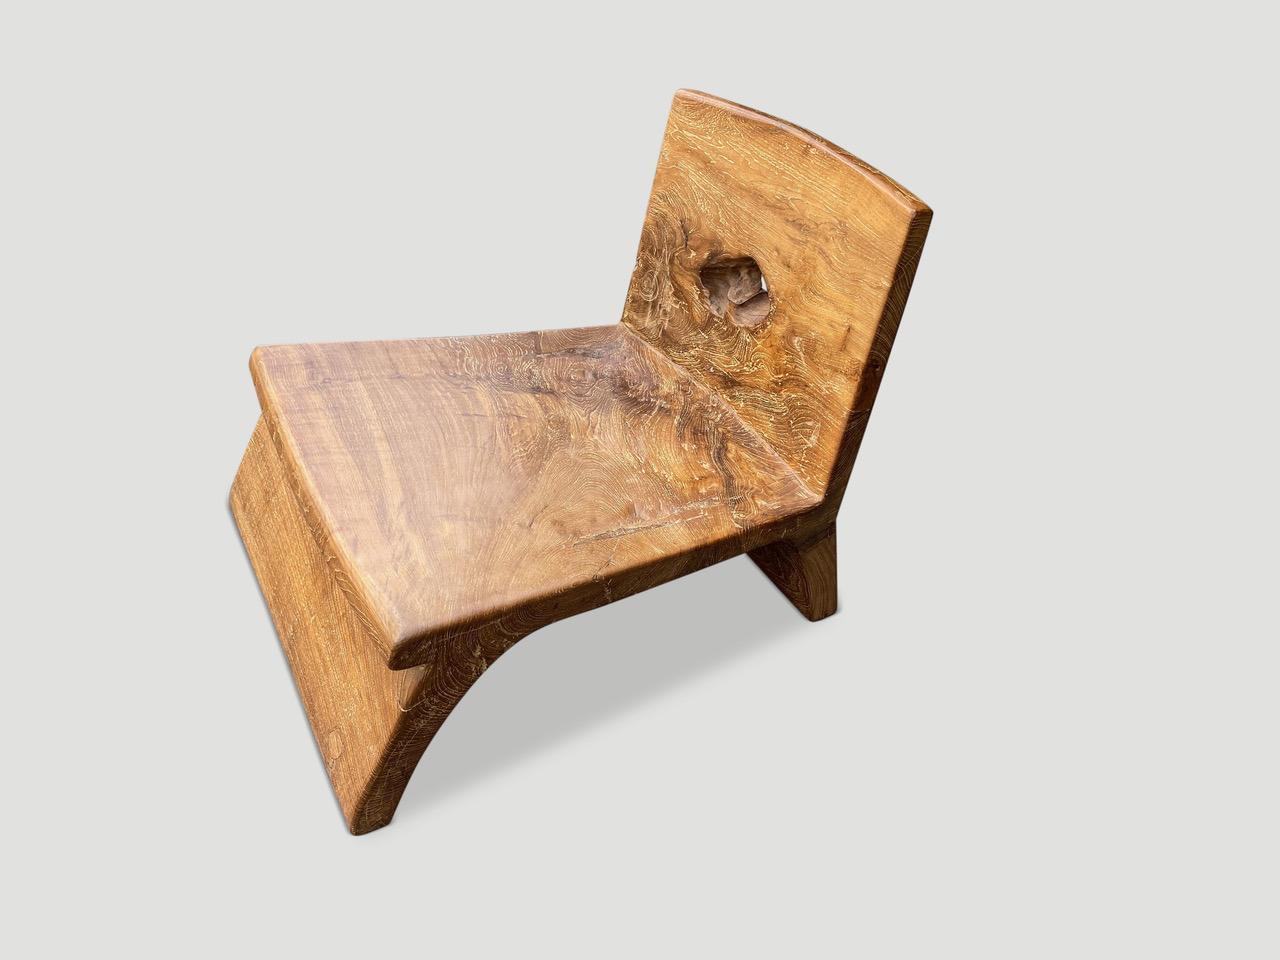 Andrianna Shamaris Sculptural Teak Wood Spa Chair In Excellent Condition For Sale In New York, NY